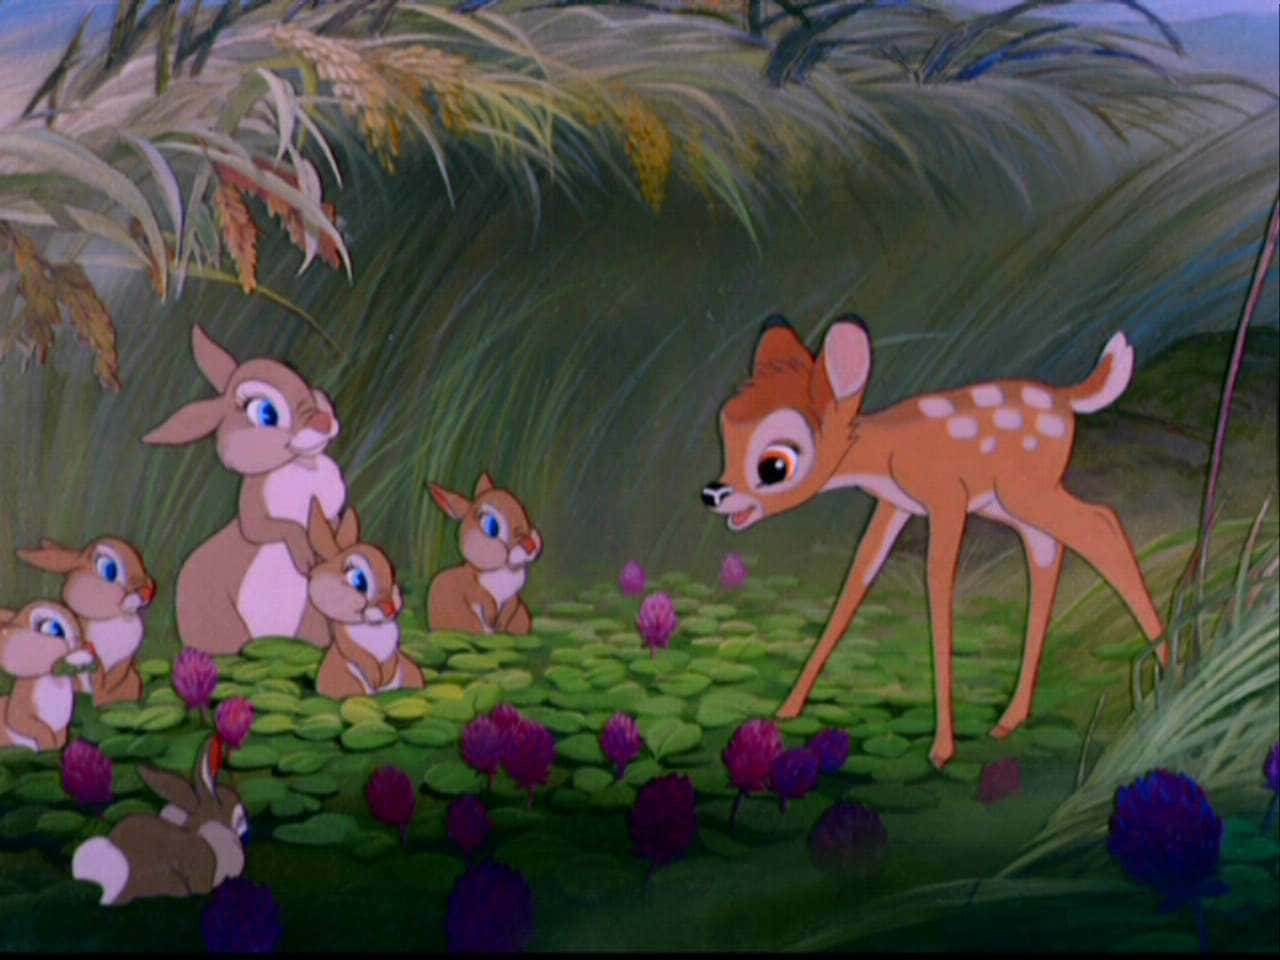 Bambi stares out into a wondrous forest